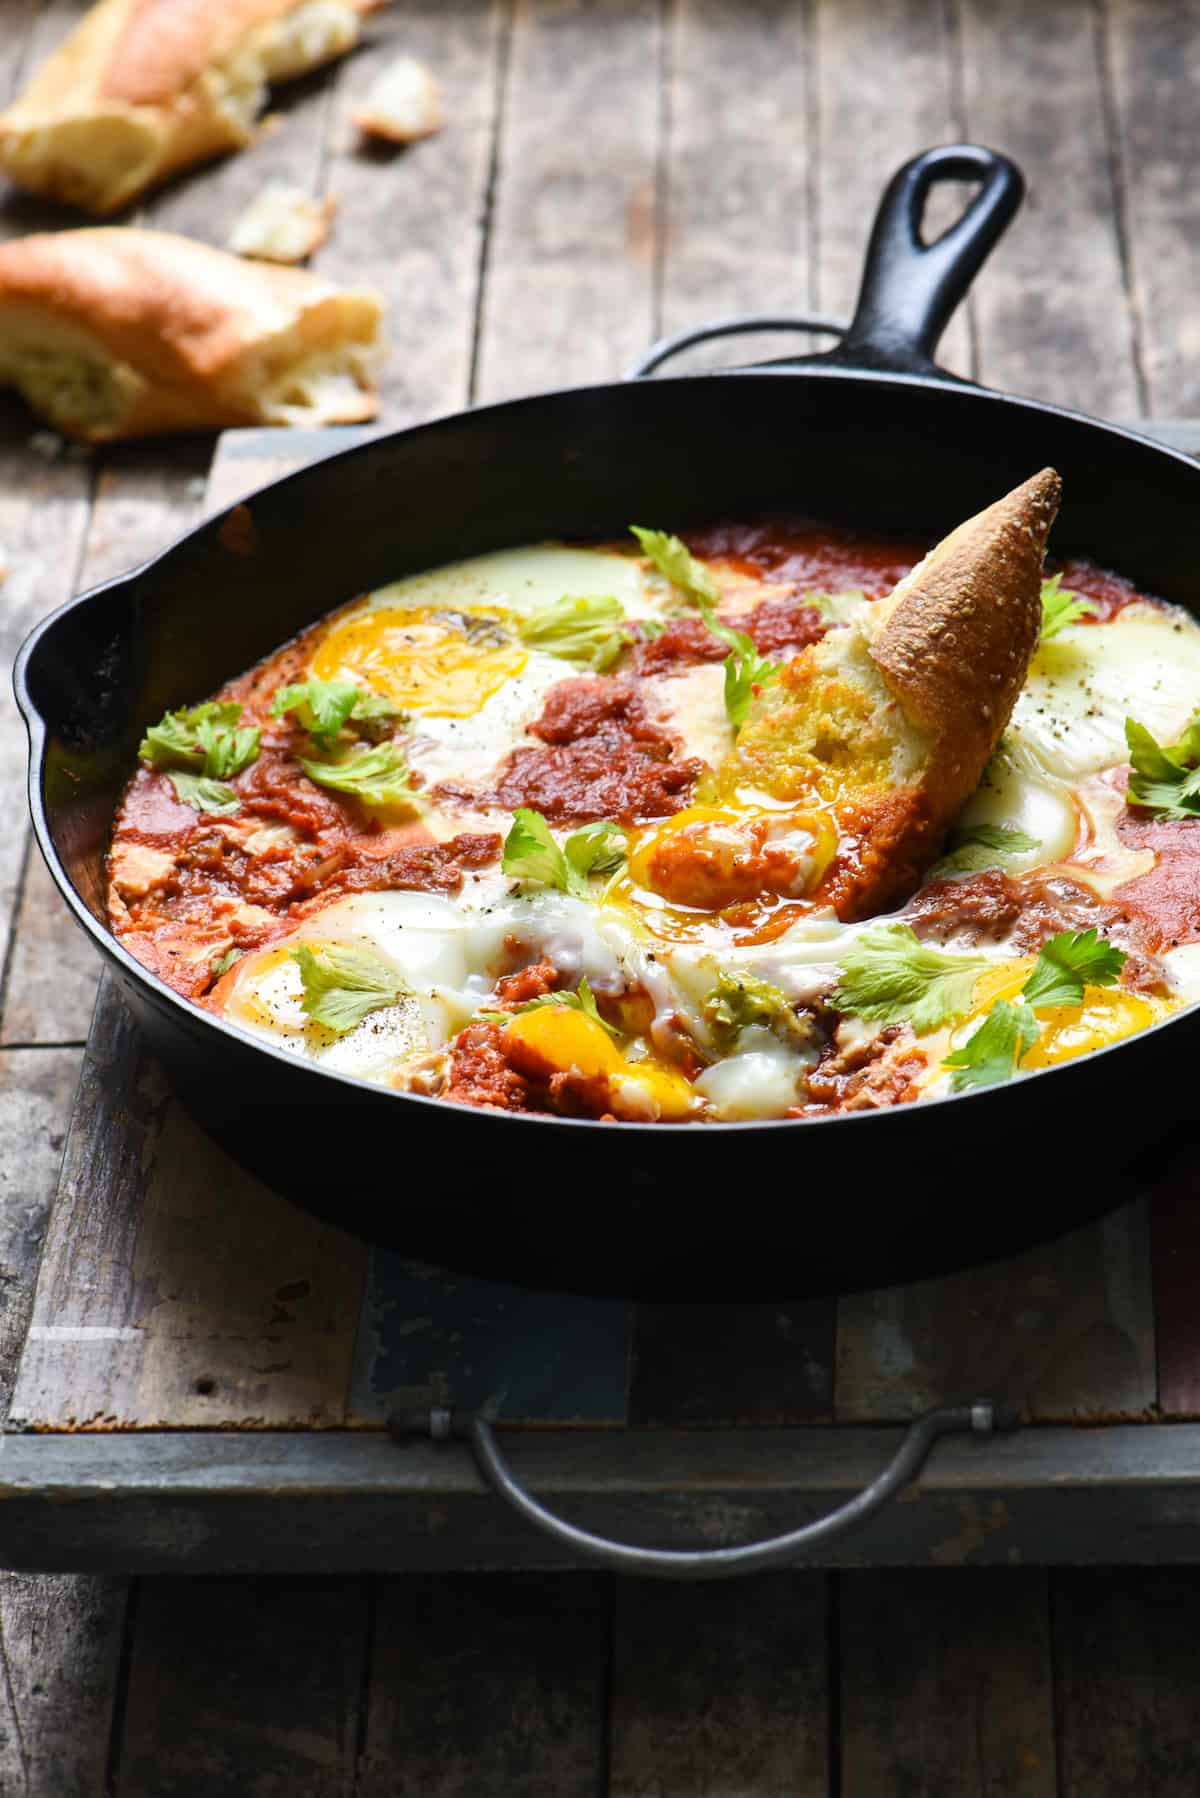 Bloody Mary Shakshuka - Horseradish-infused tomatoes topped with soft eggs. Serve with crusty bread for a quick, easy and very affordable meal! | foxeslovelemons.com